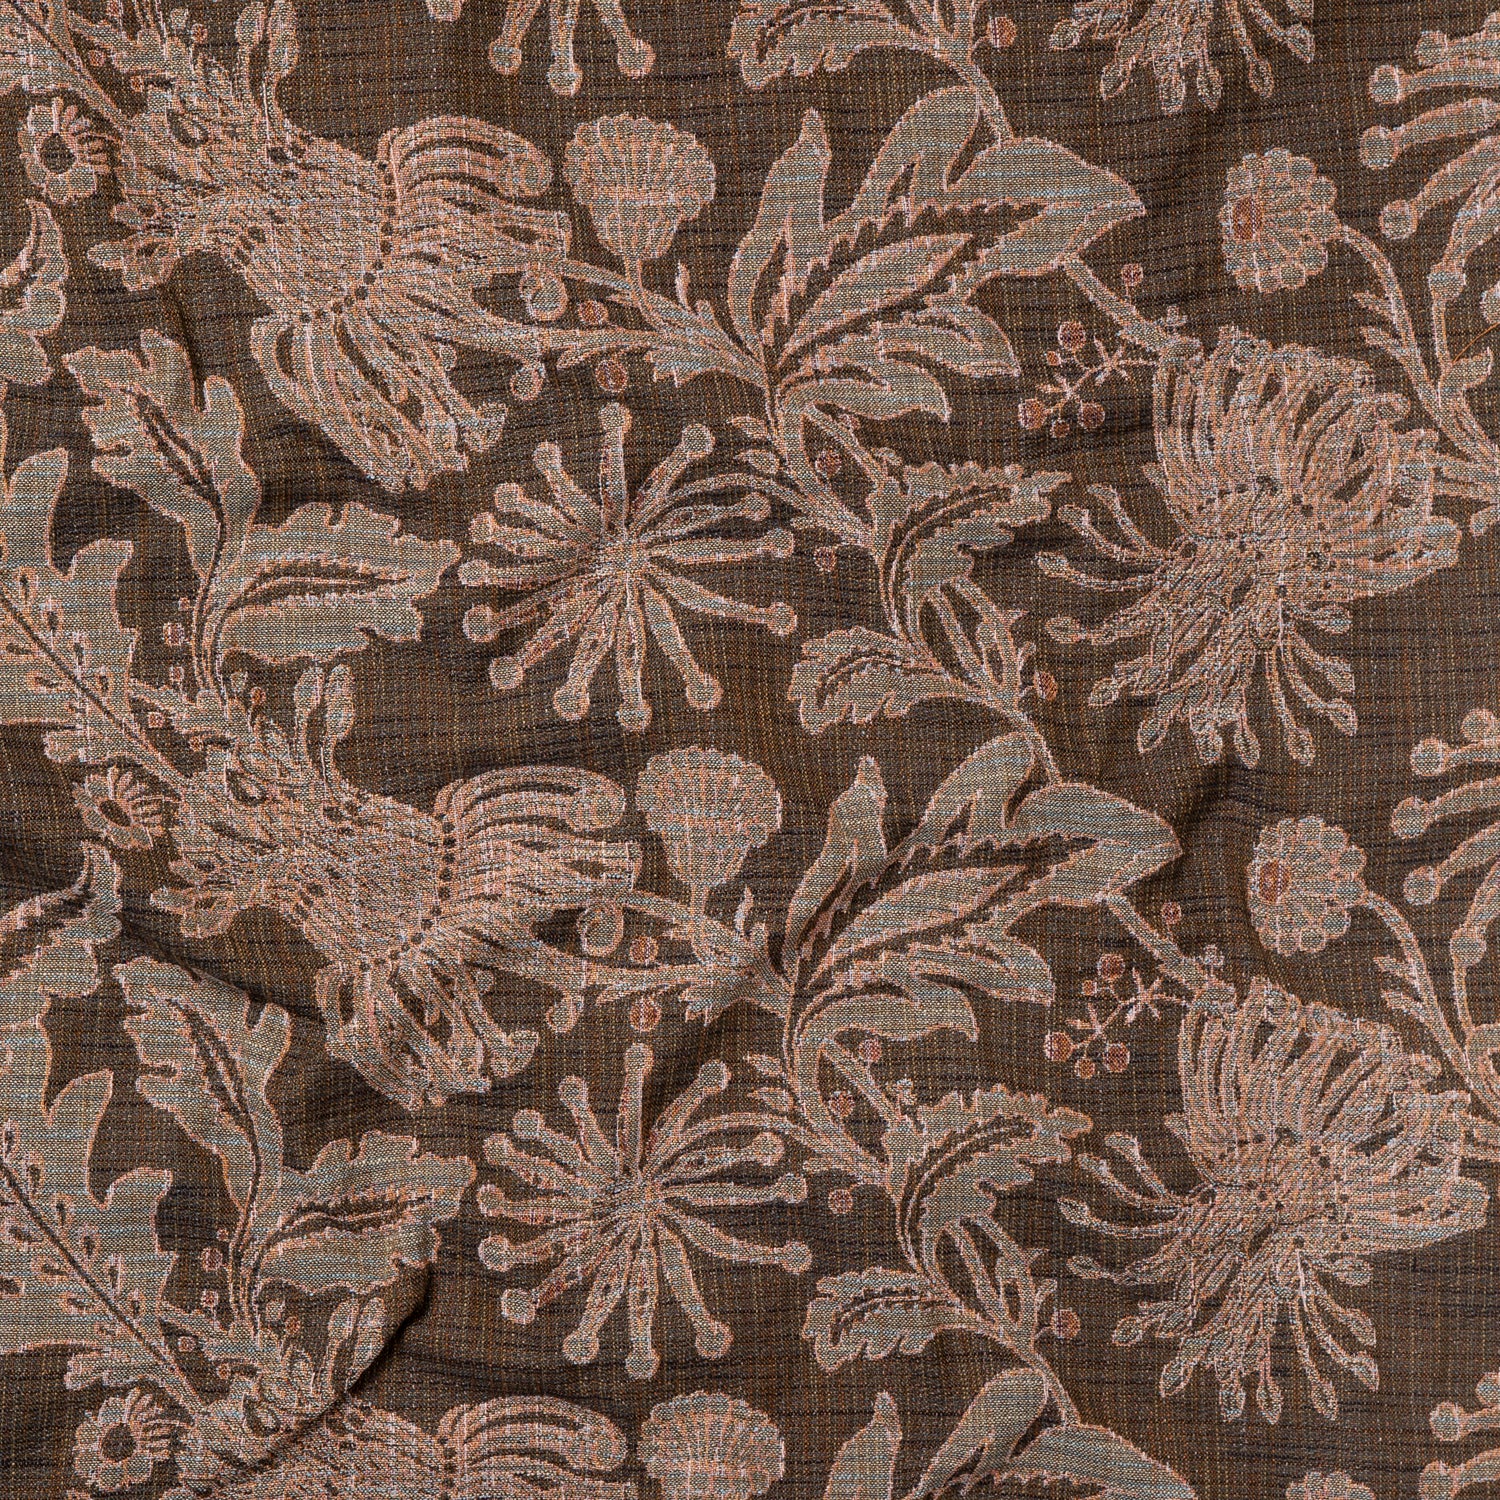 Draped fabric yardage in a large-scale floral print in gray and pink on a brown field.